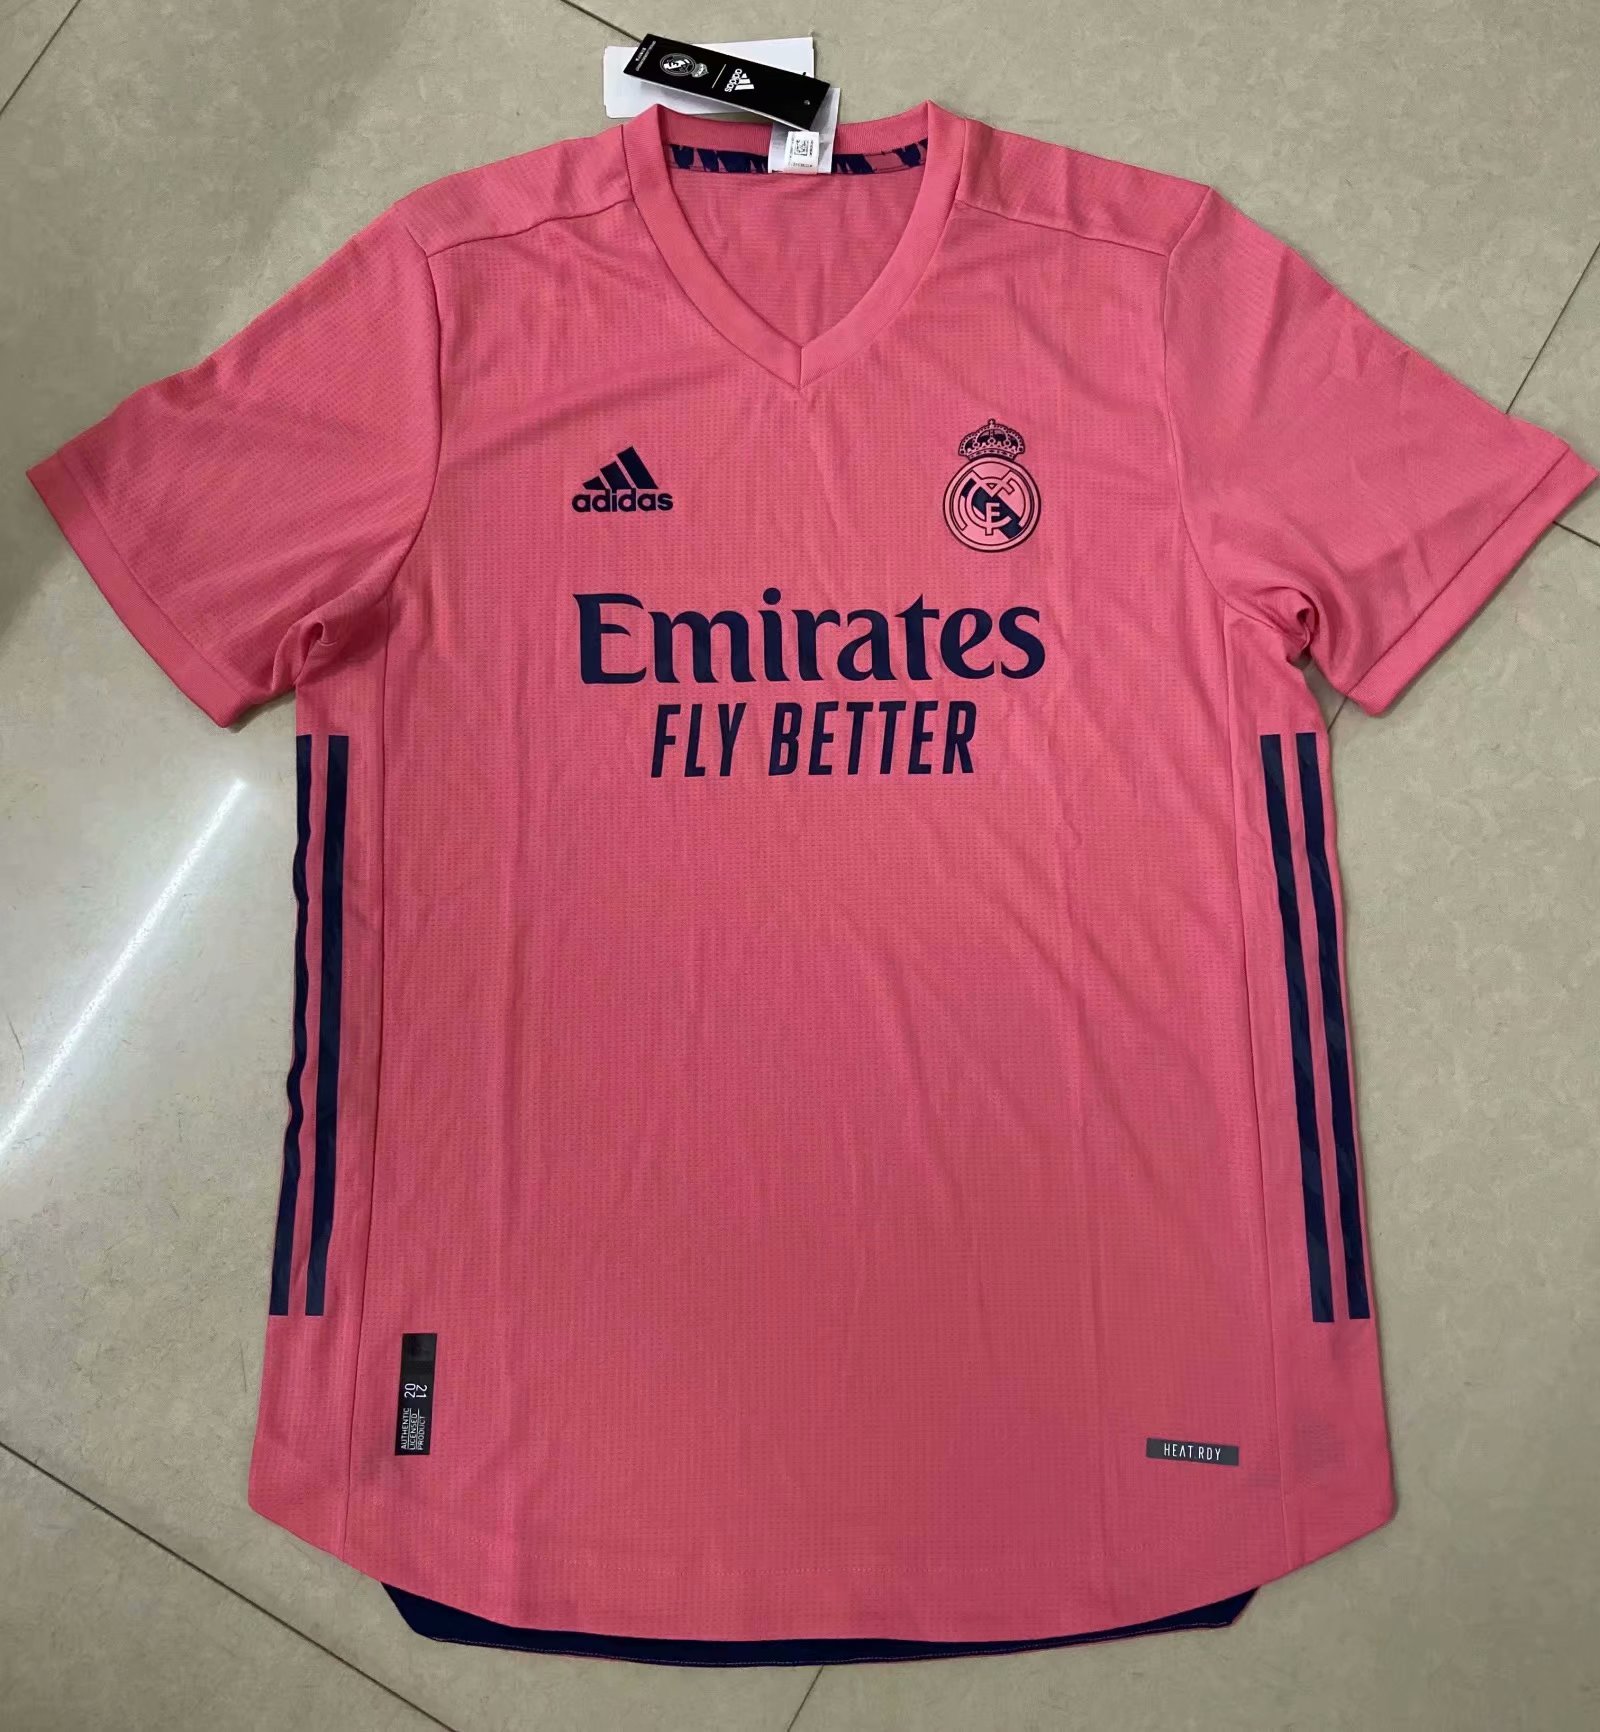 20/21 New Adult top players version Real Madrid away pink soccer jersey football shirt